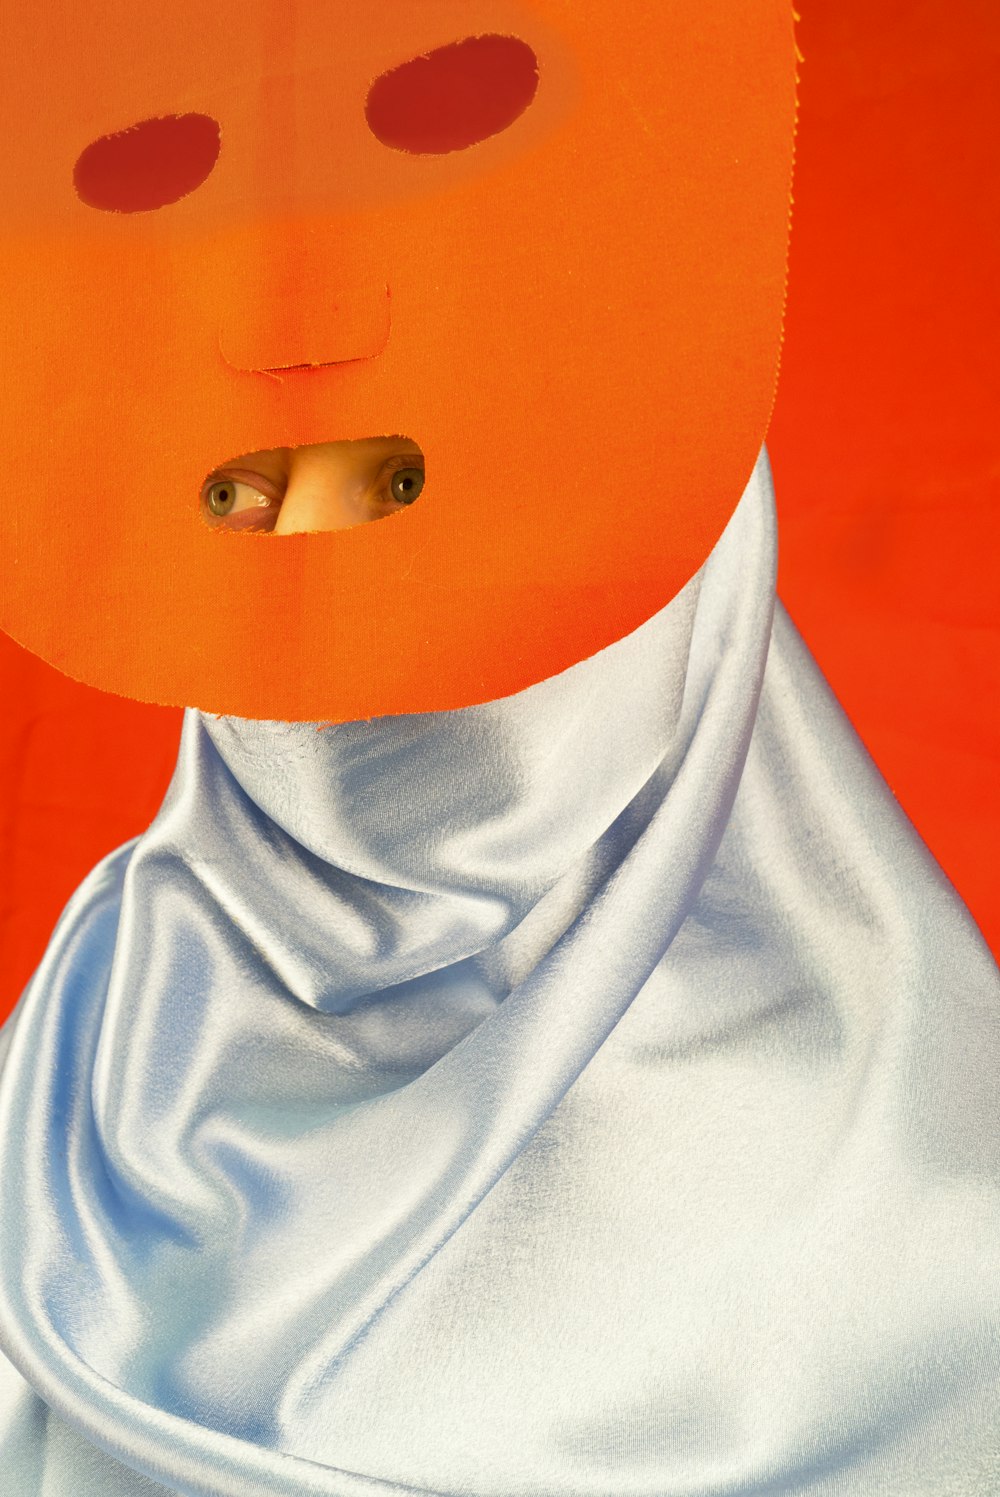 a painting of a person wearing an orange mask